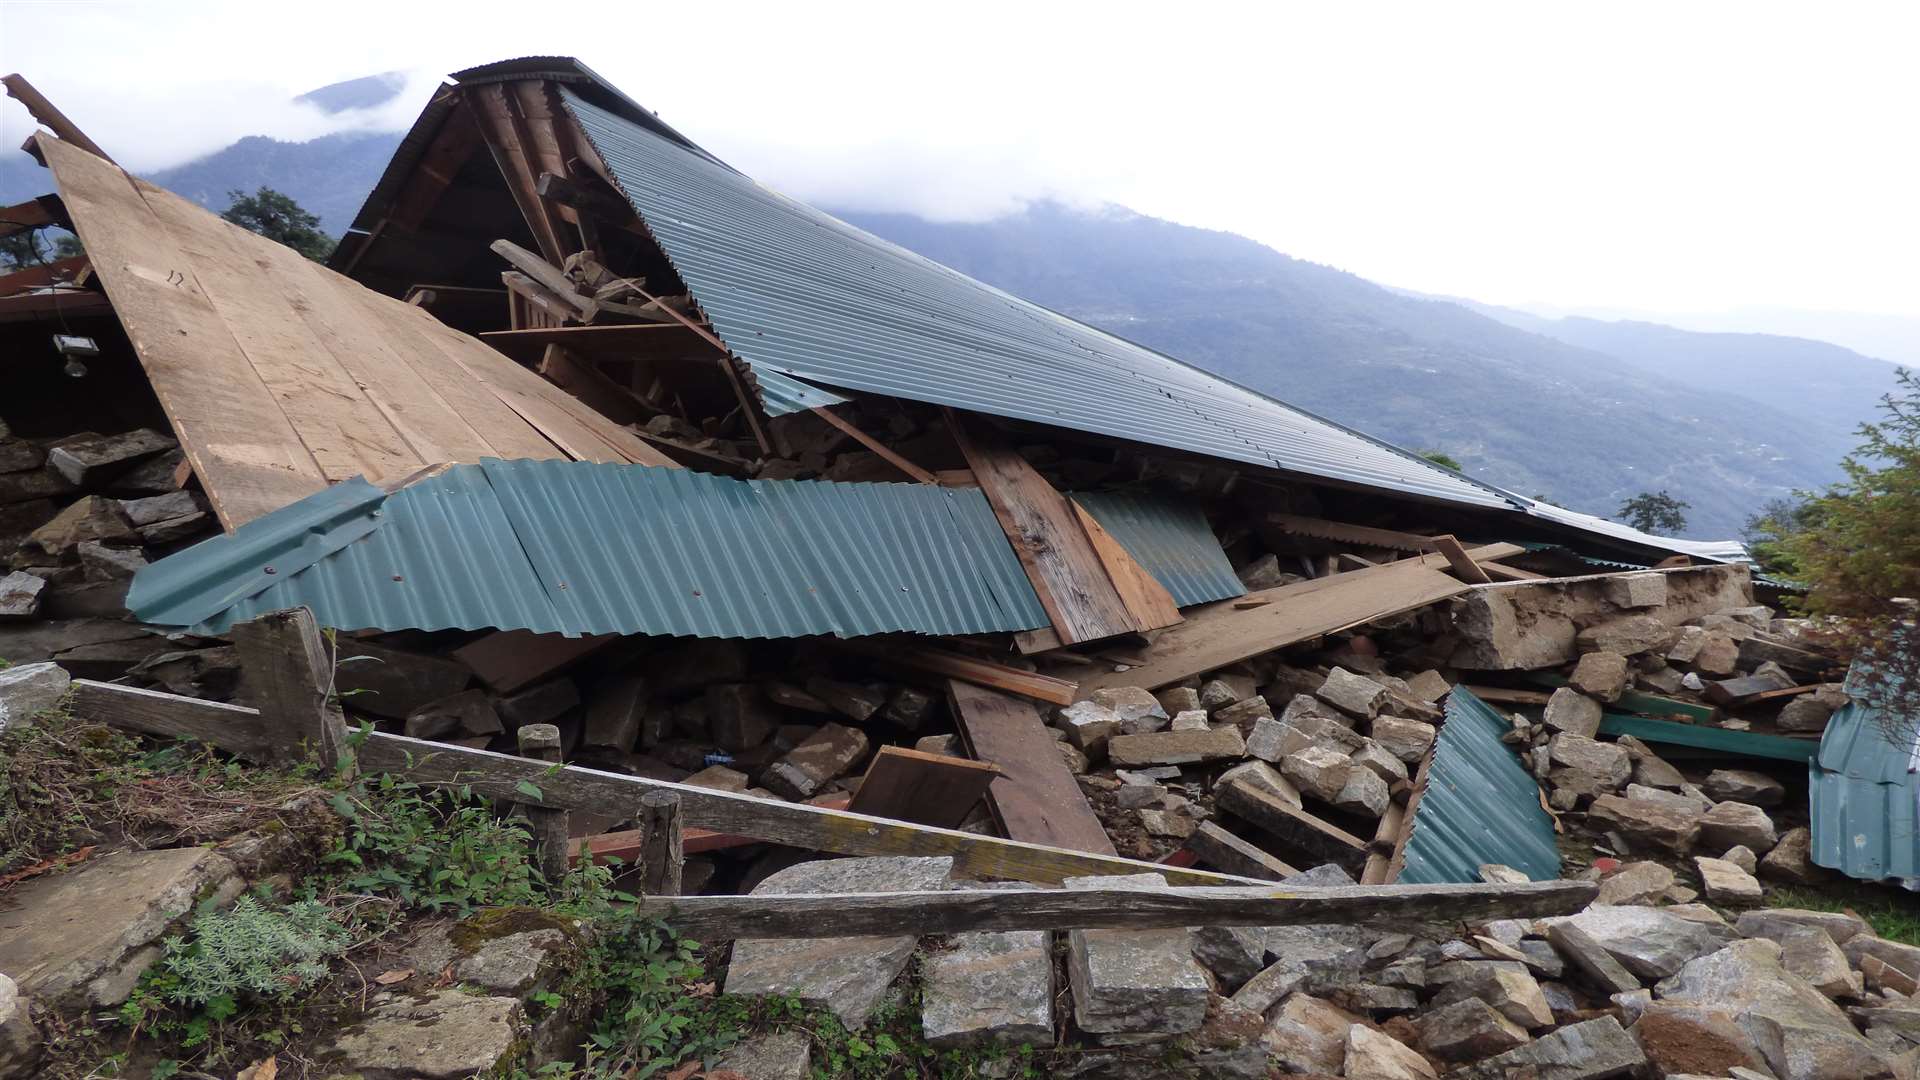 Lois escaped from the rubble of this house. Image from Corin Hardcastle